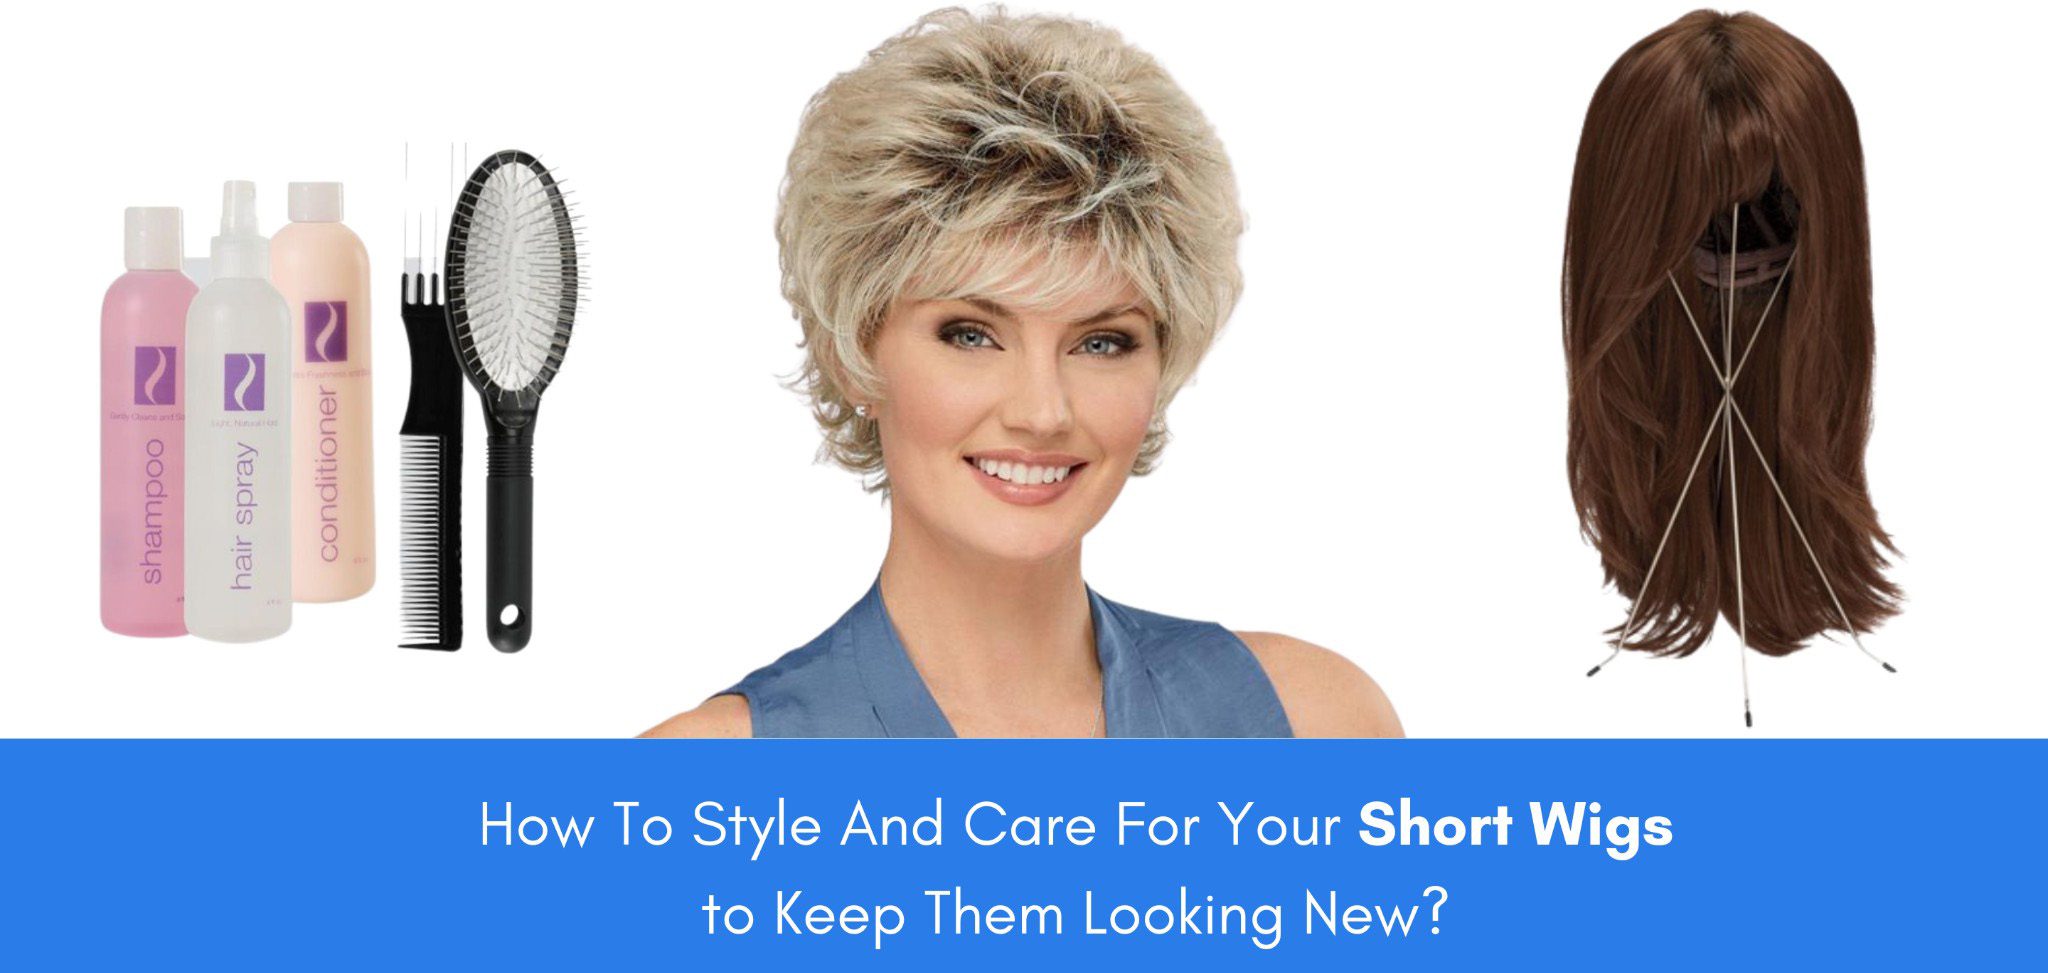 How To Style And Care For Your Short Wigs to Keep Them Looking New?